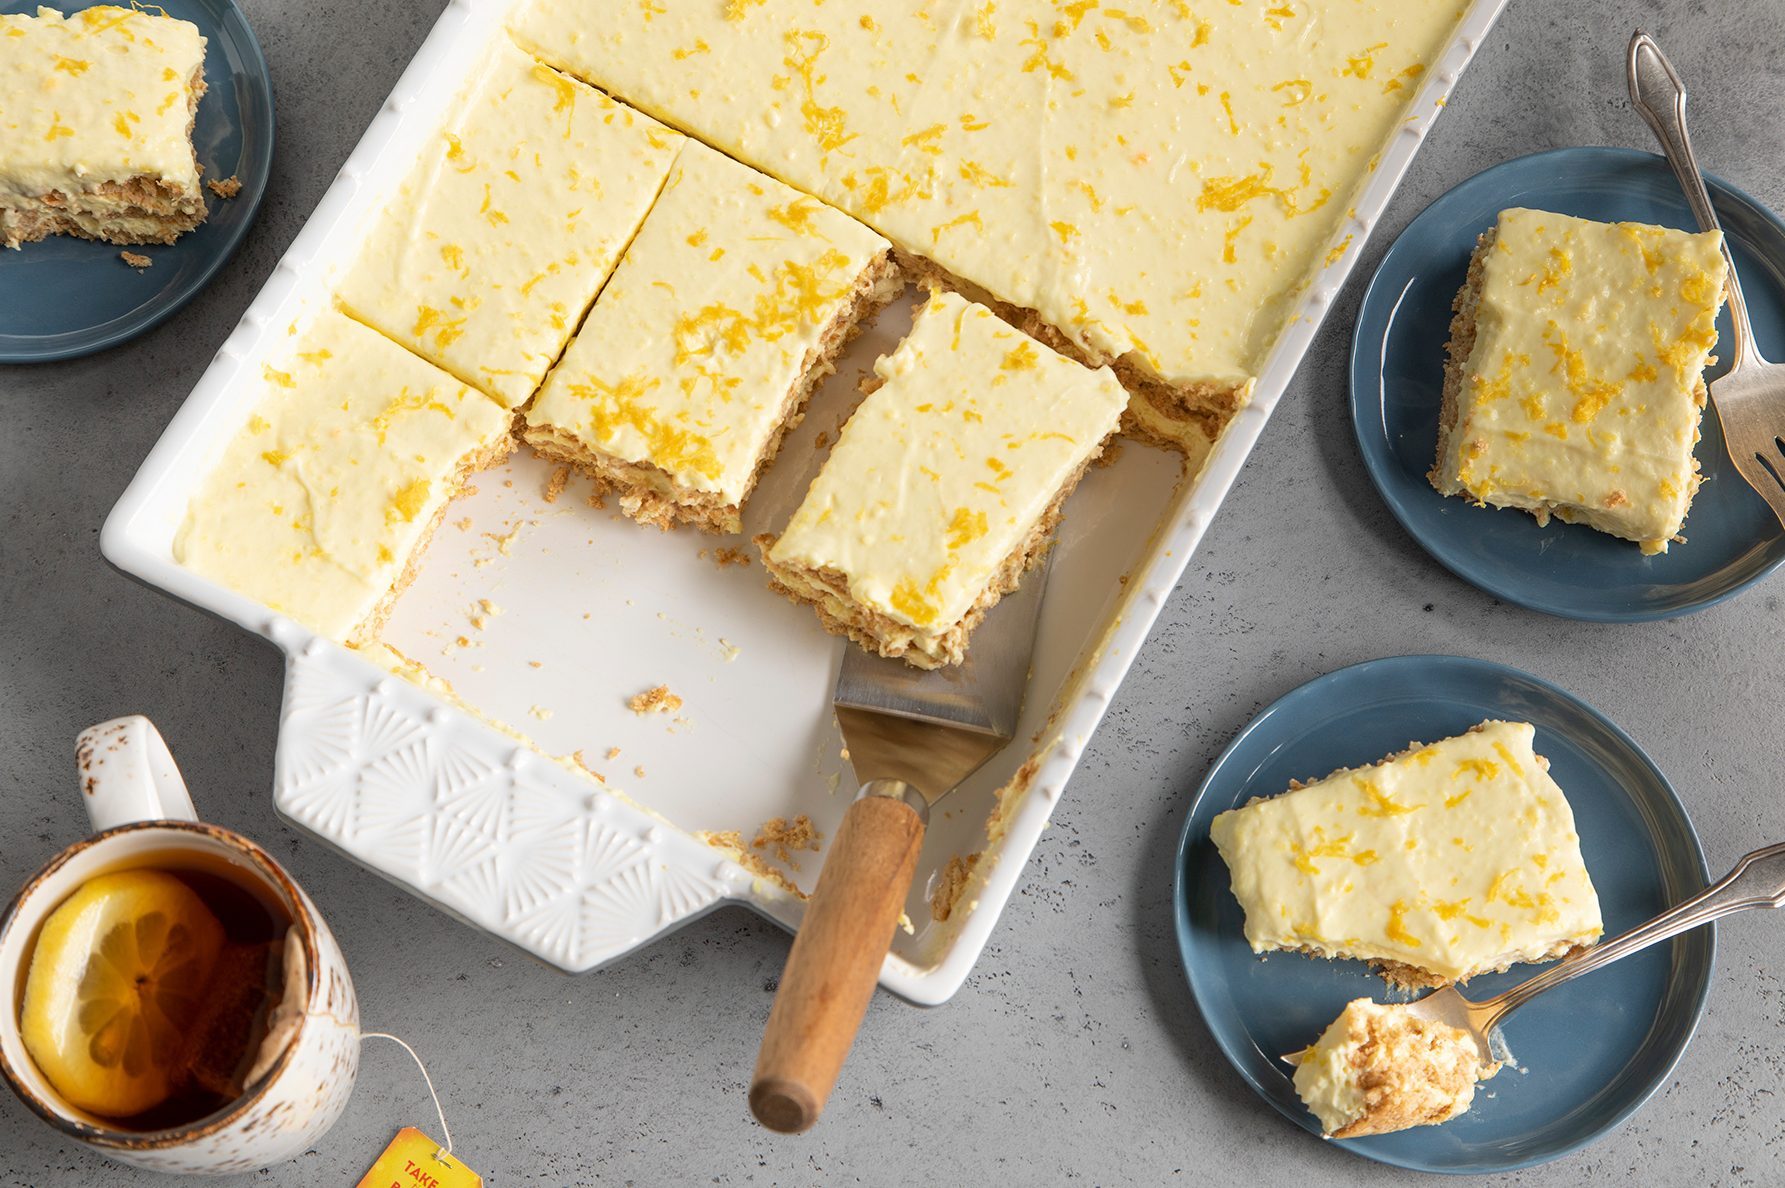 A white rectangular baking dish contains lemon squares, with several pieces already cut. Three lemon squares are placed on blue plates, each with a fork.